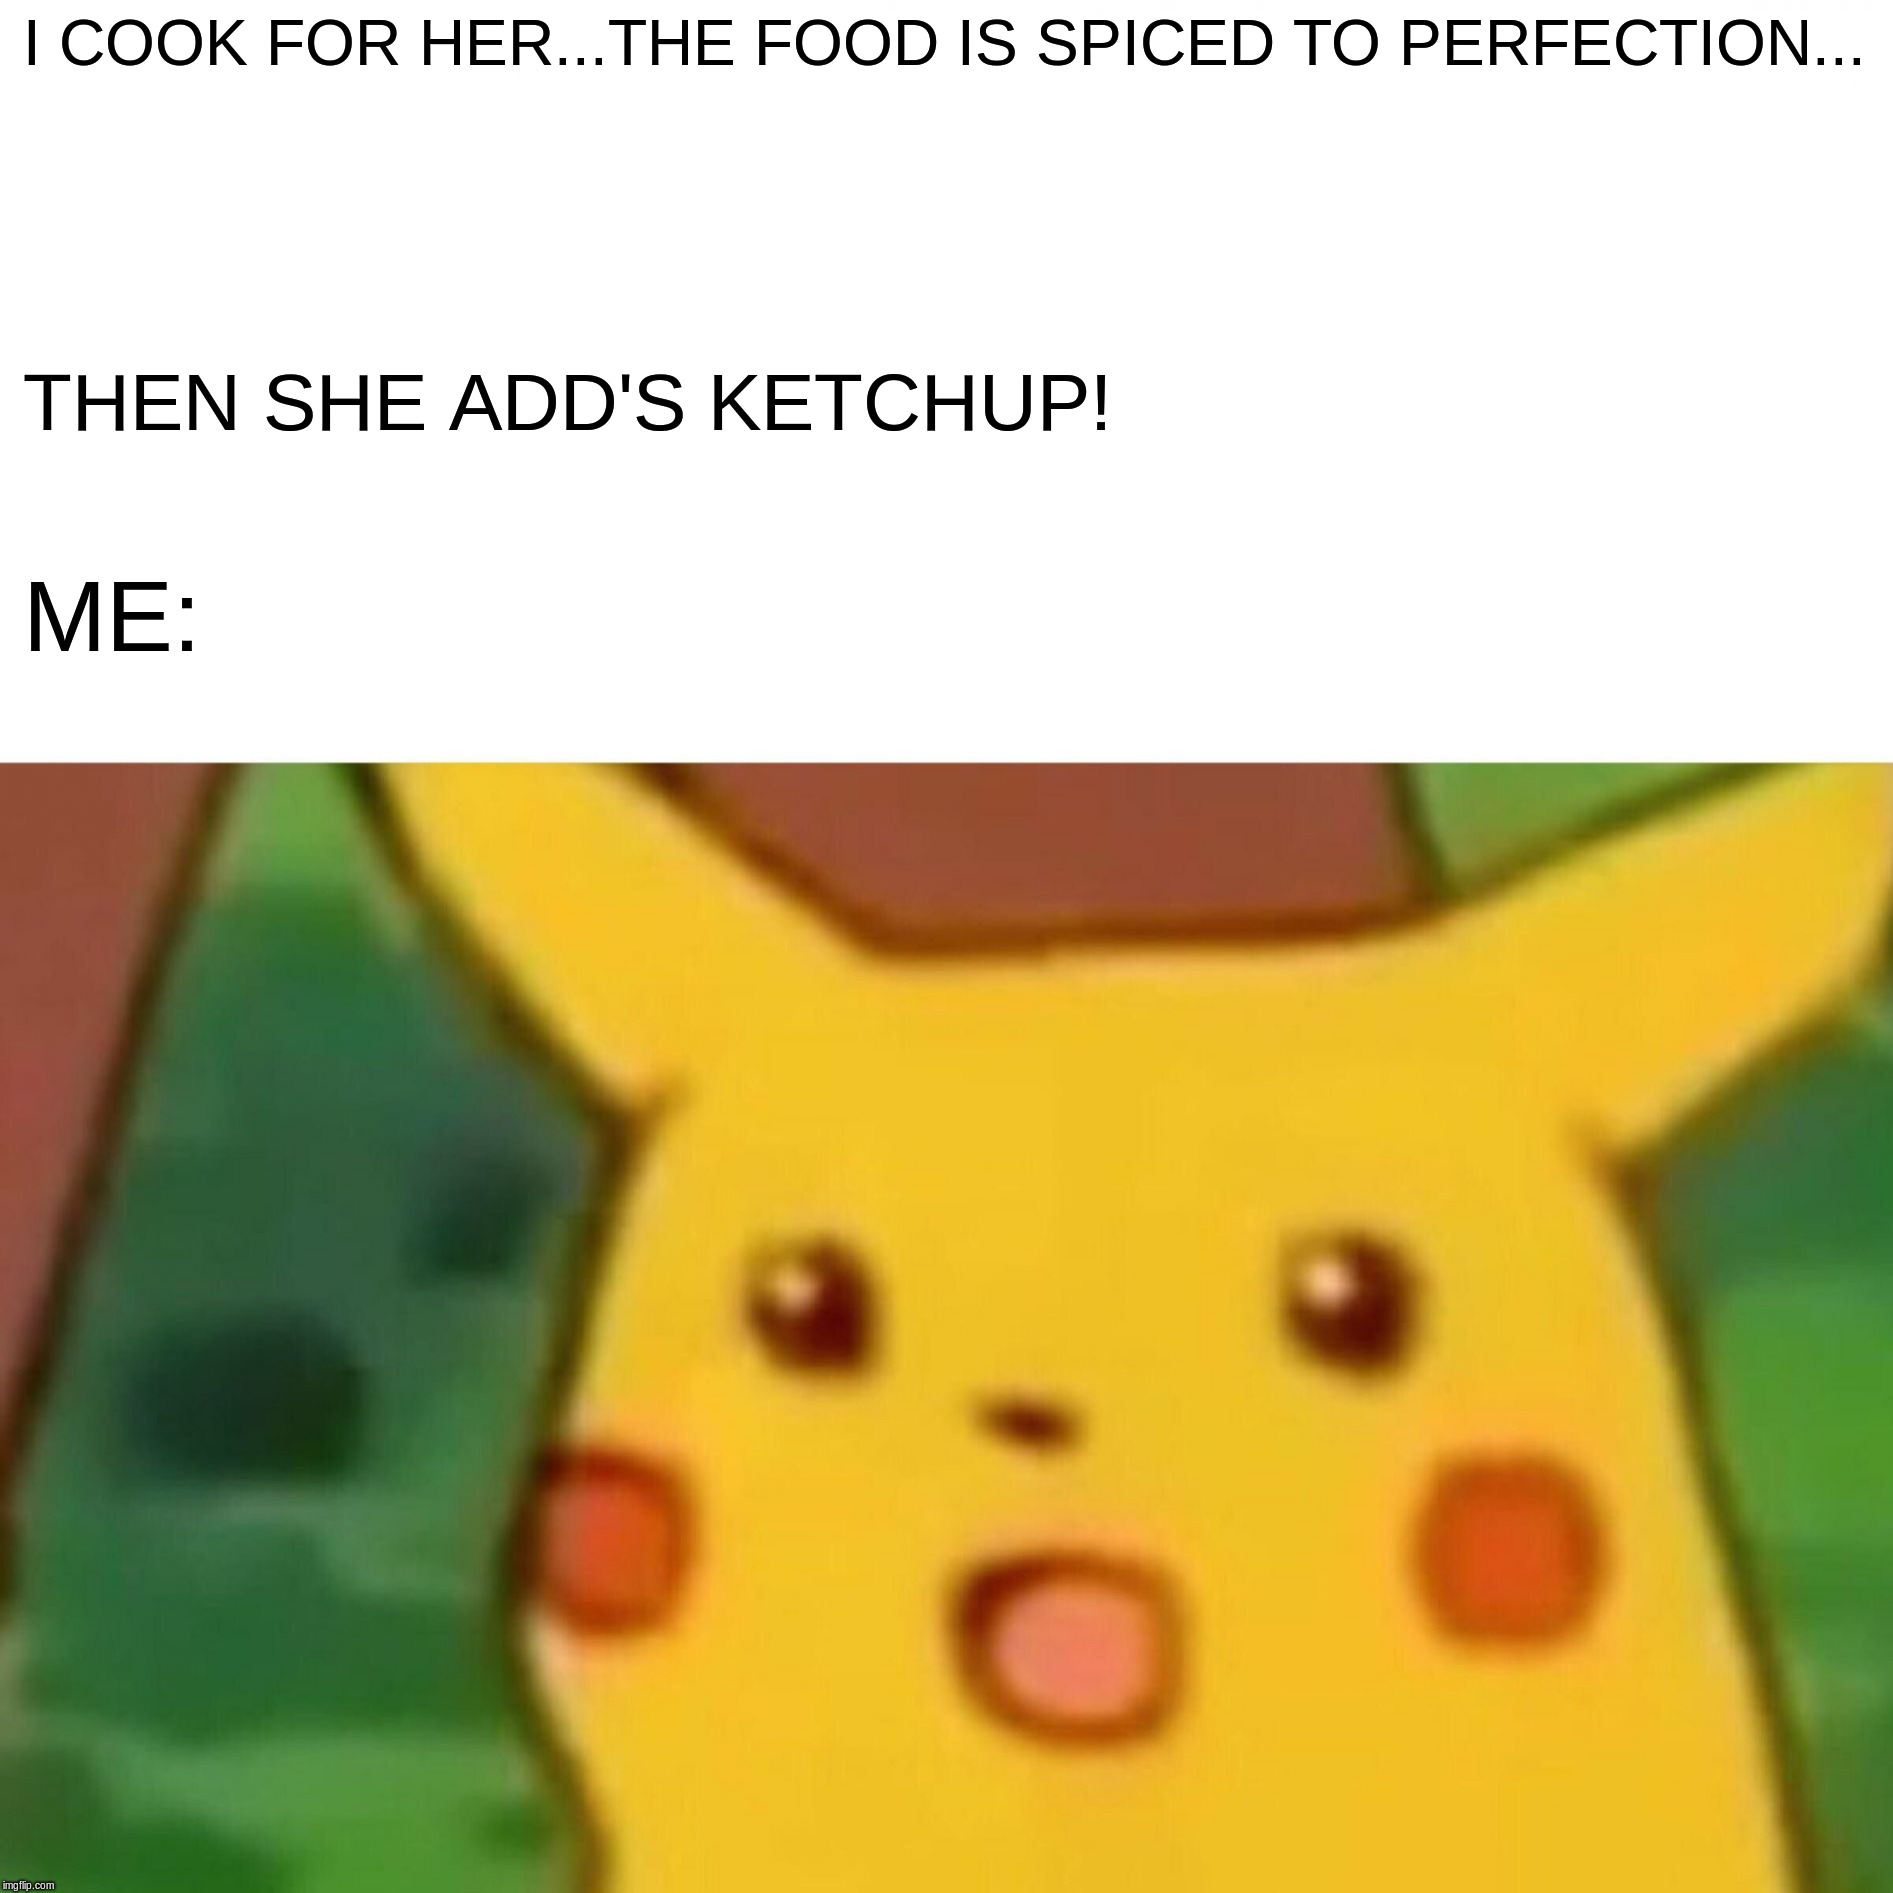 Surprised Pikachu | I COOK FOR HER...THE FOOD IS SPICED TO PERFECTION... THEN SHE ADD'S KETCHUP! ME: | image tagged in memes,surprised pikachu,spice,food,wife,girlfriend | made w/ Imgflip meme maker